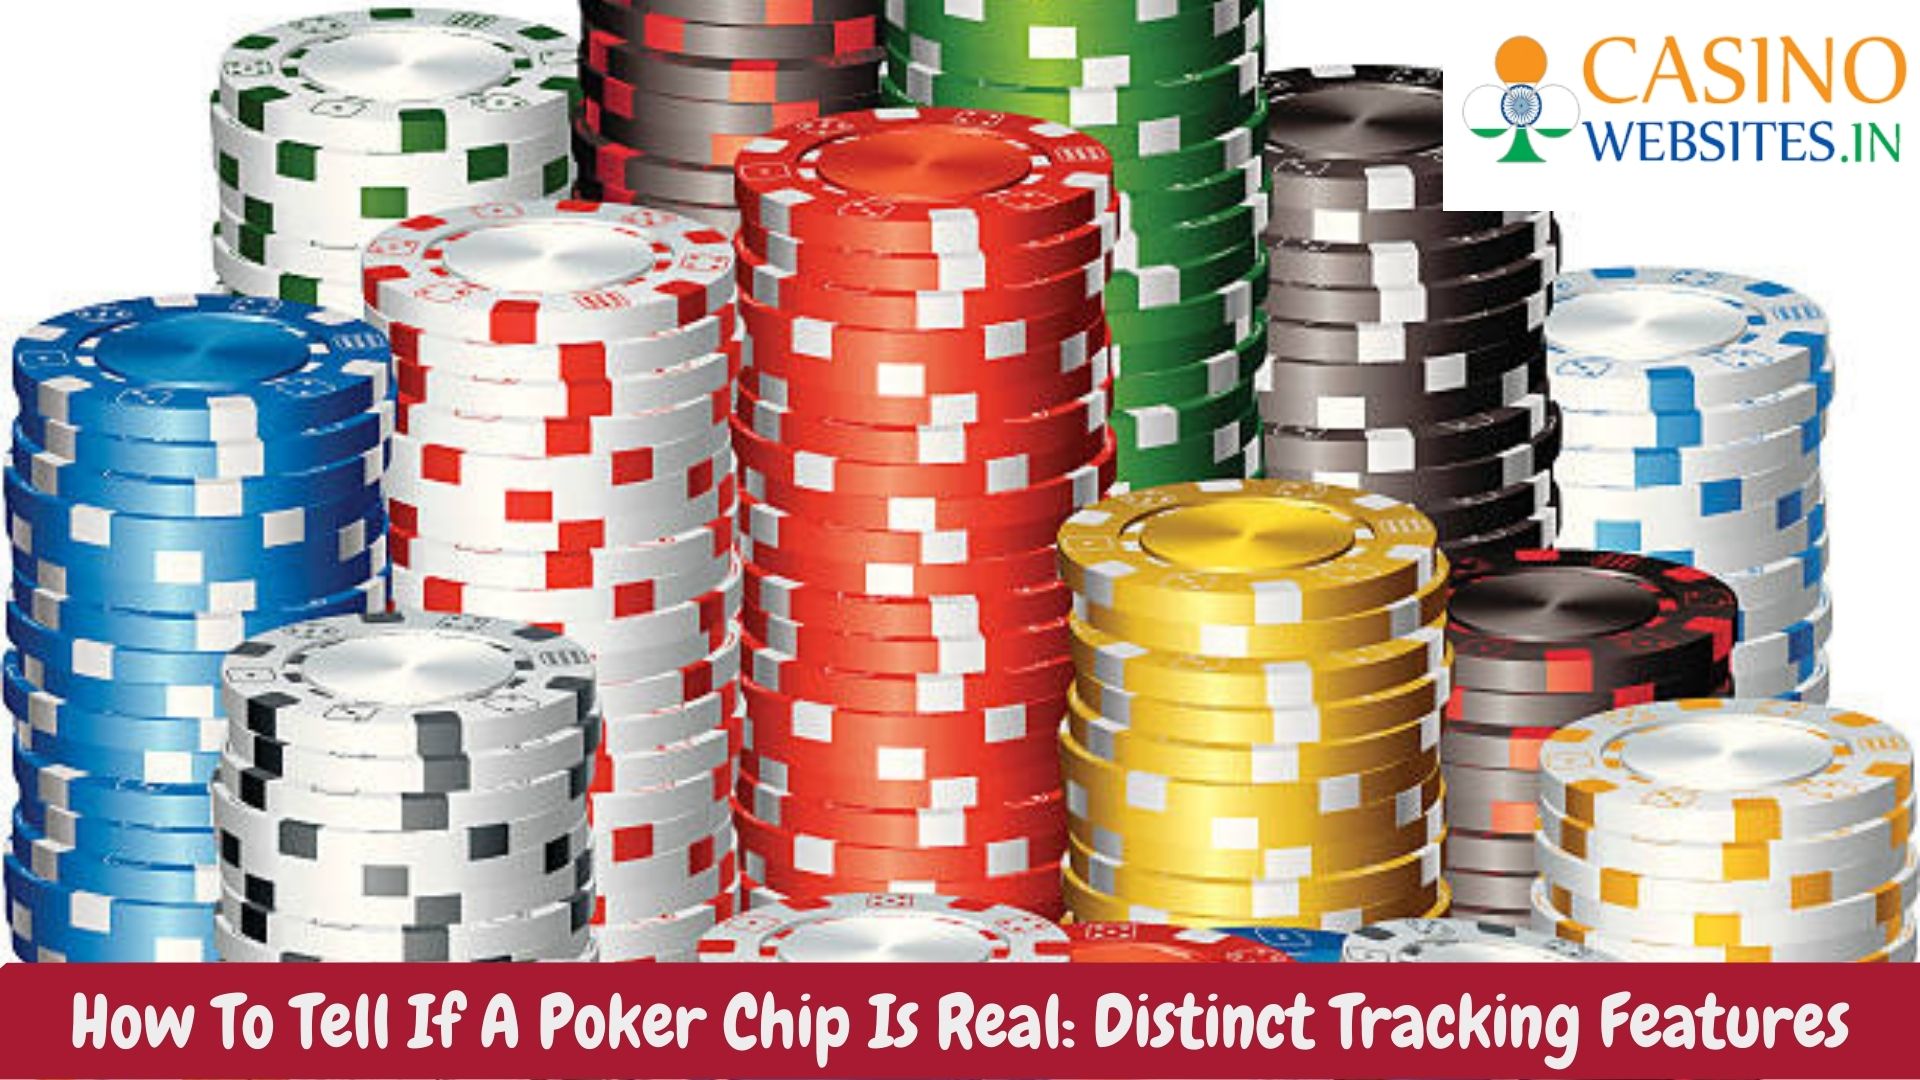 How To Tell If A Poker Chip Is Real? Main Differences To Know